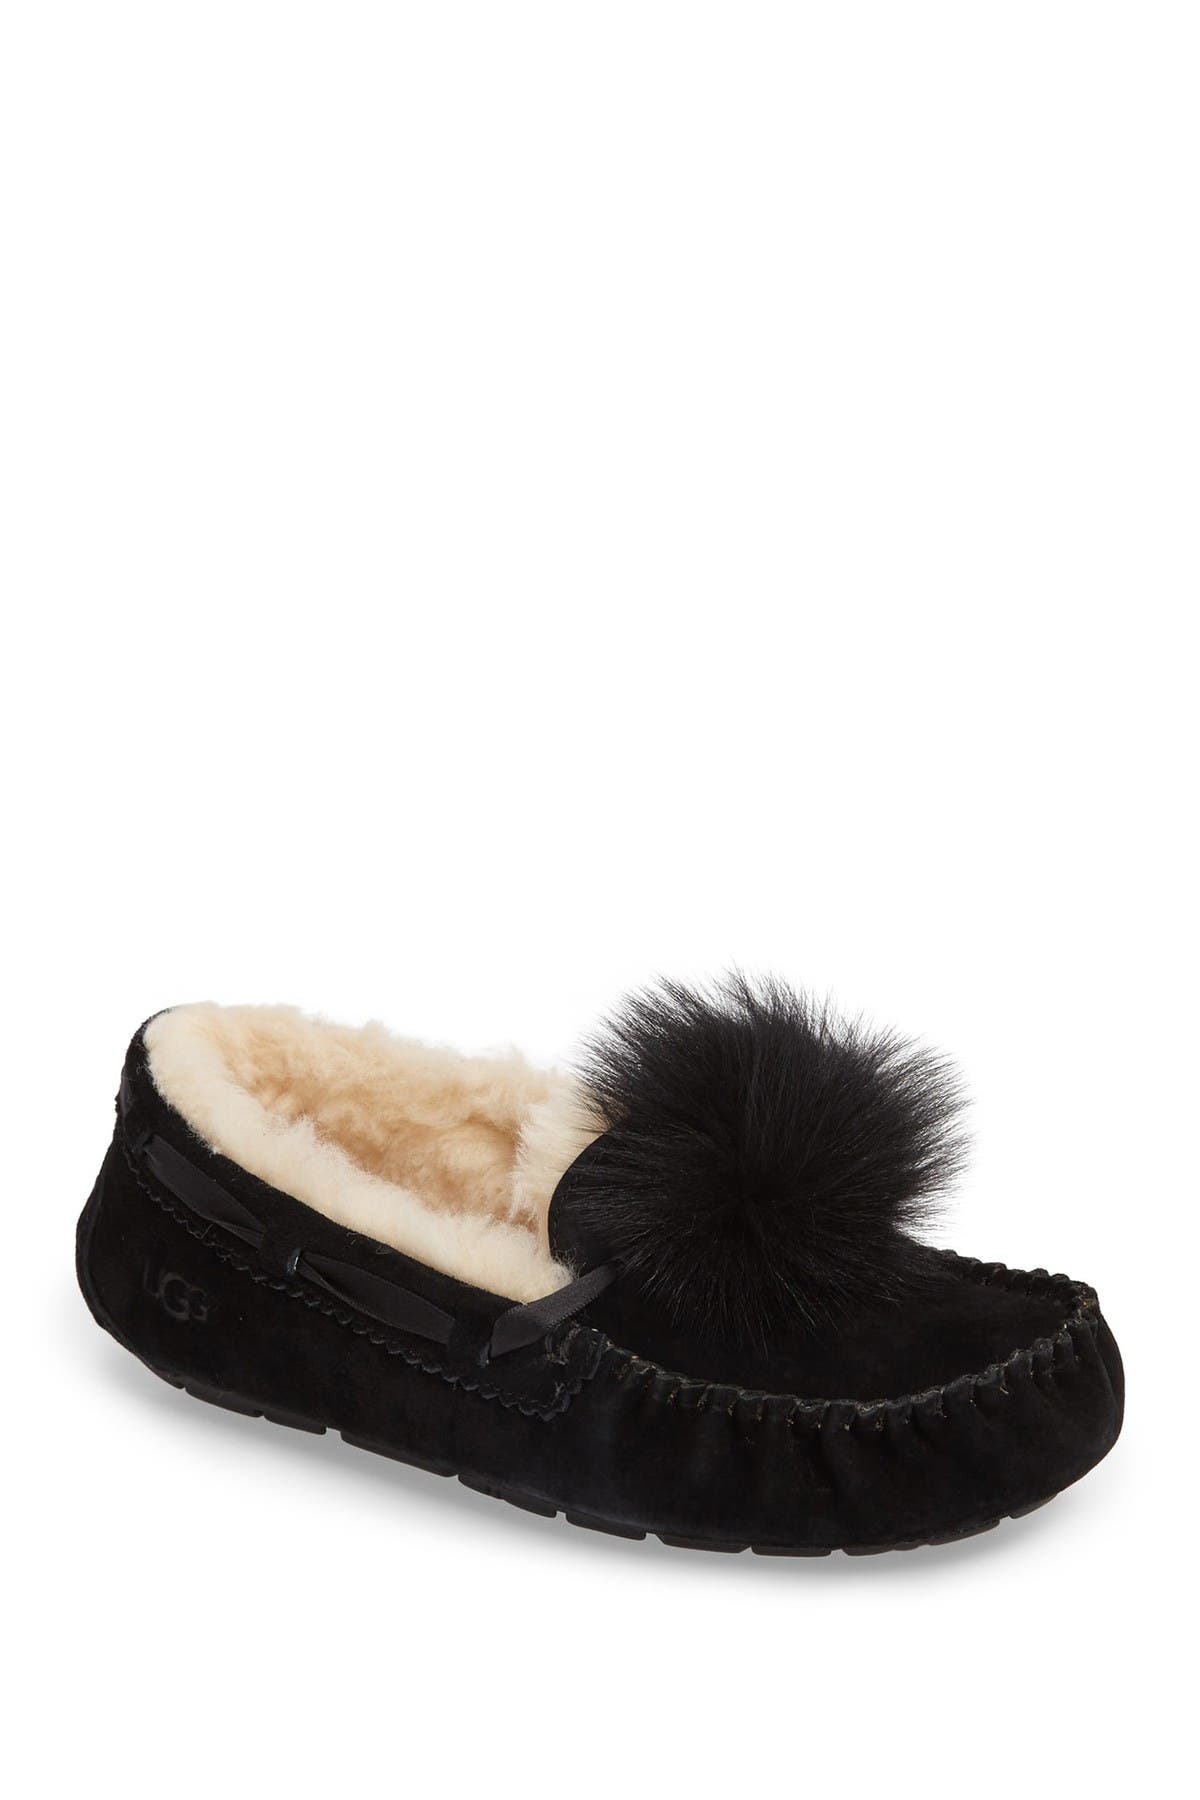 ugg fur lined slippers